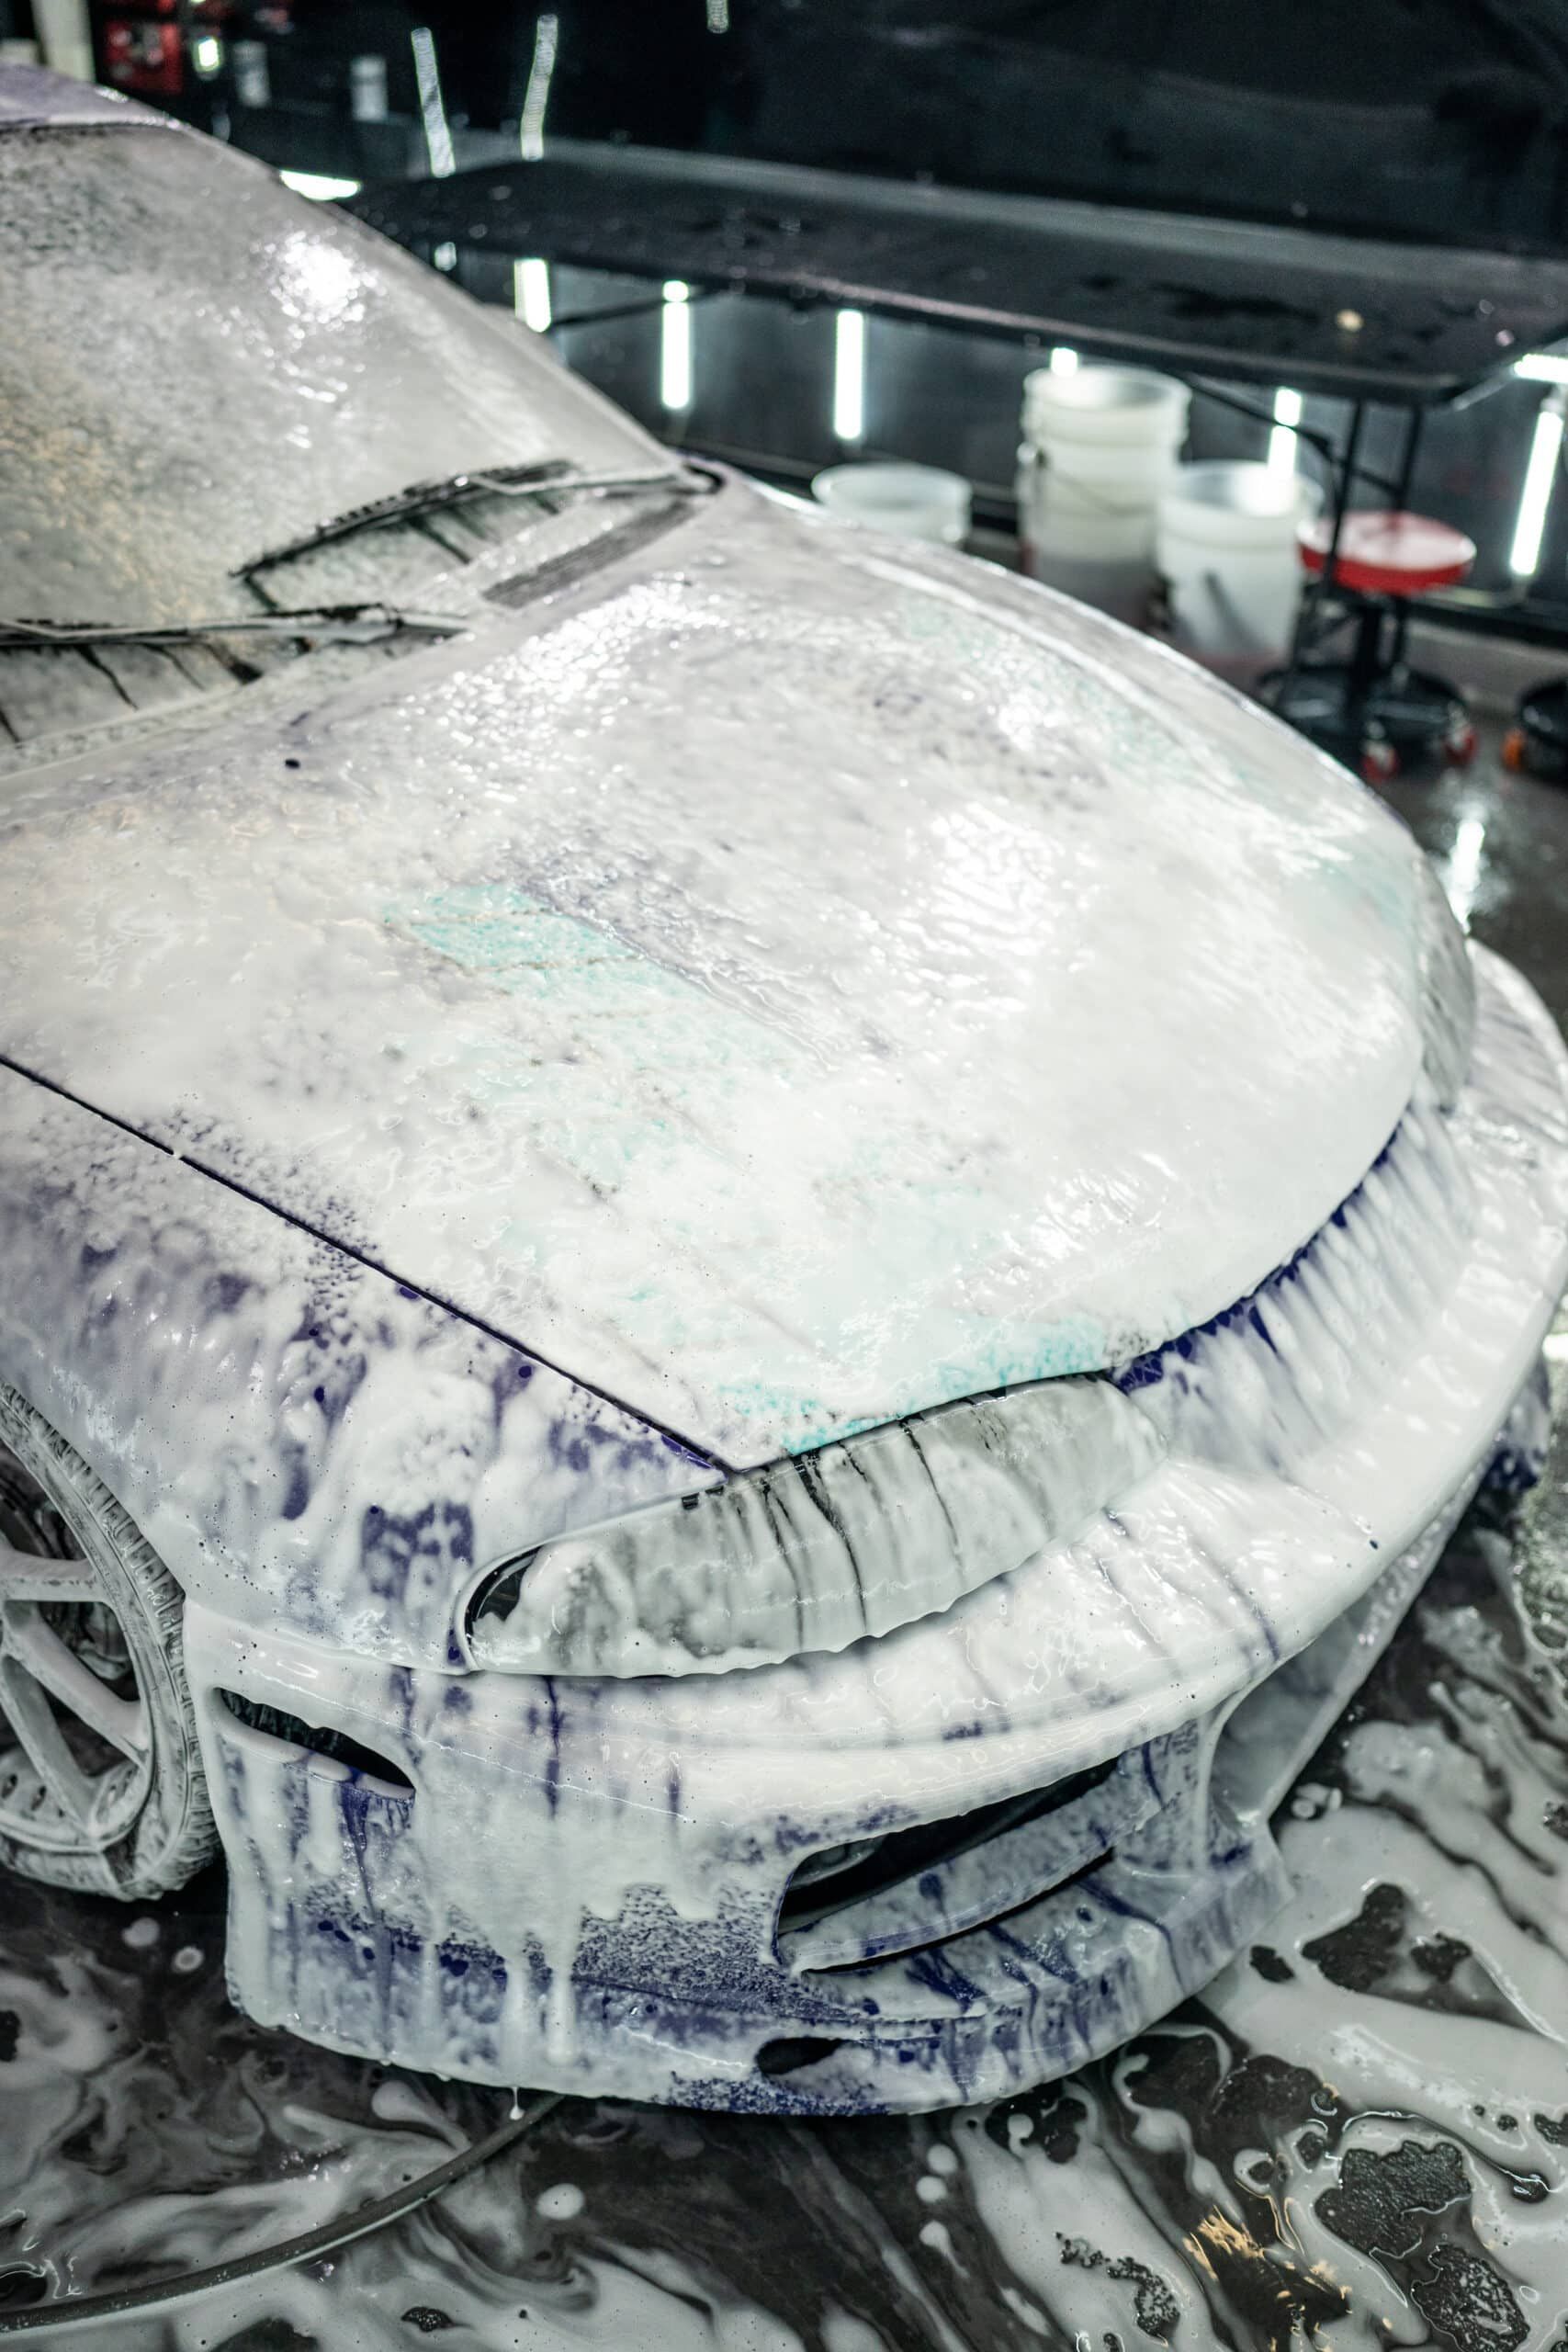 A car covered in foam is sitting on a table.